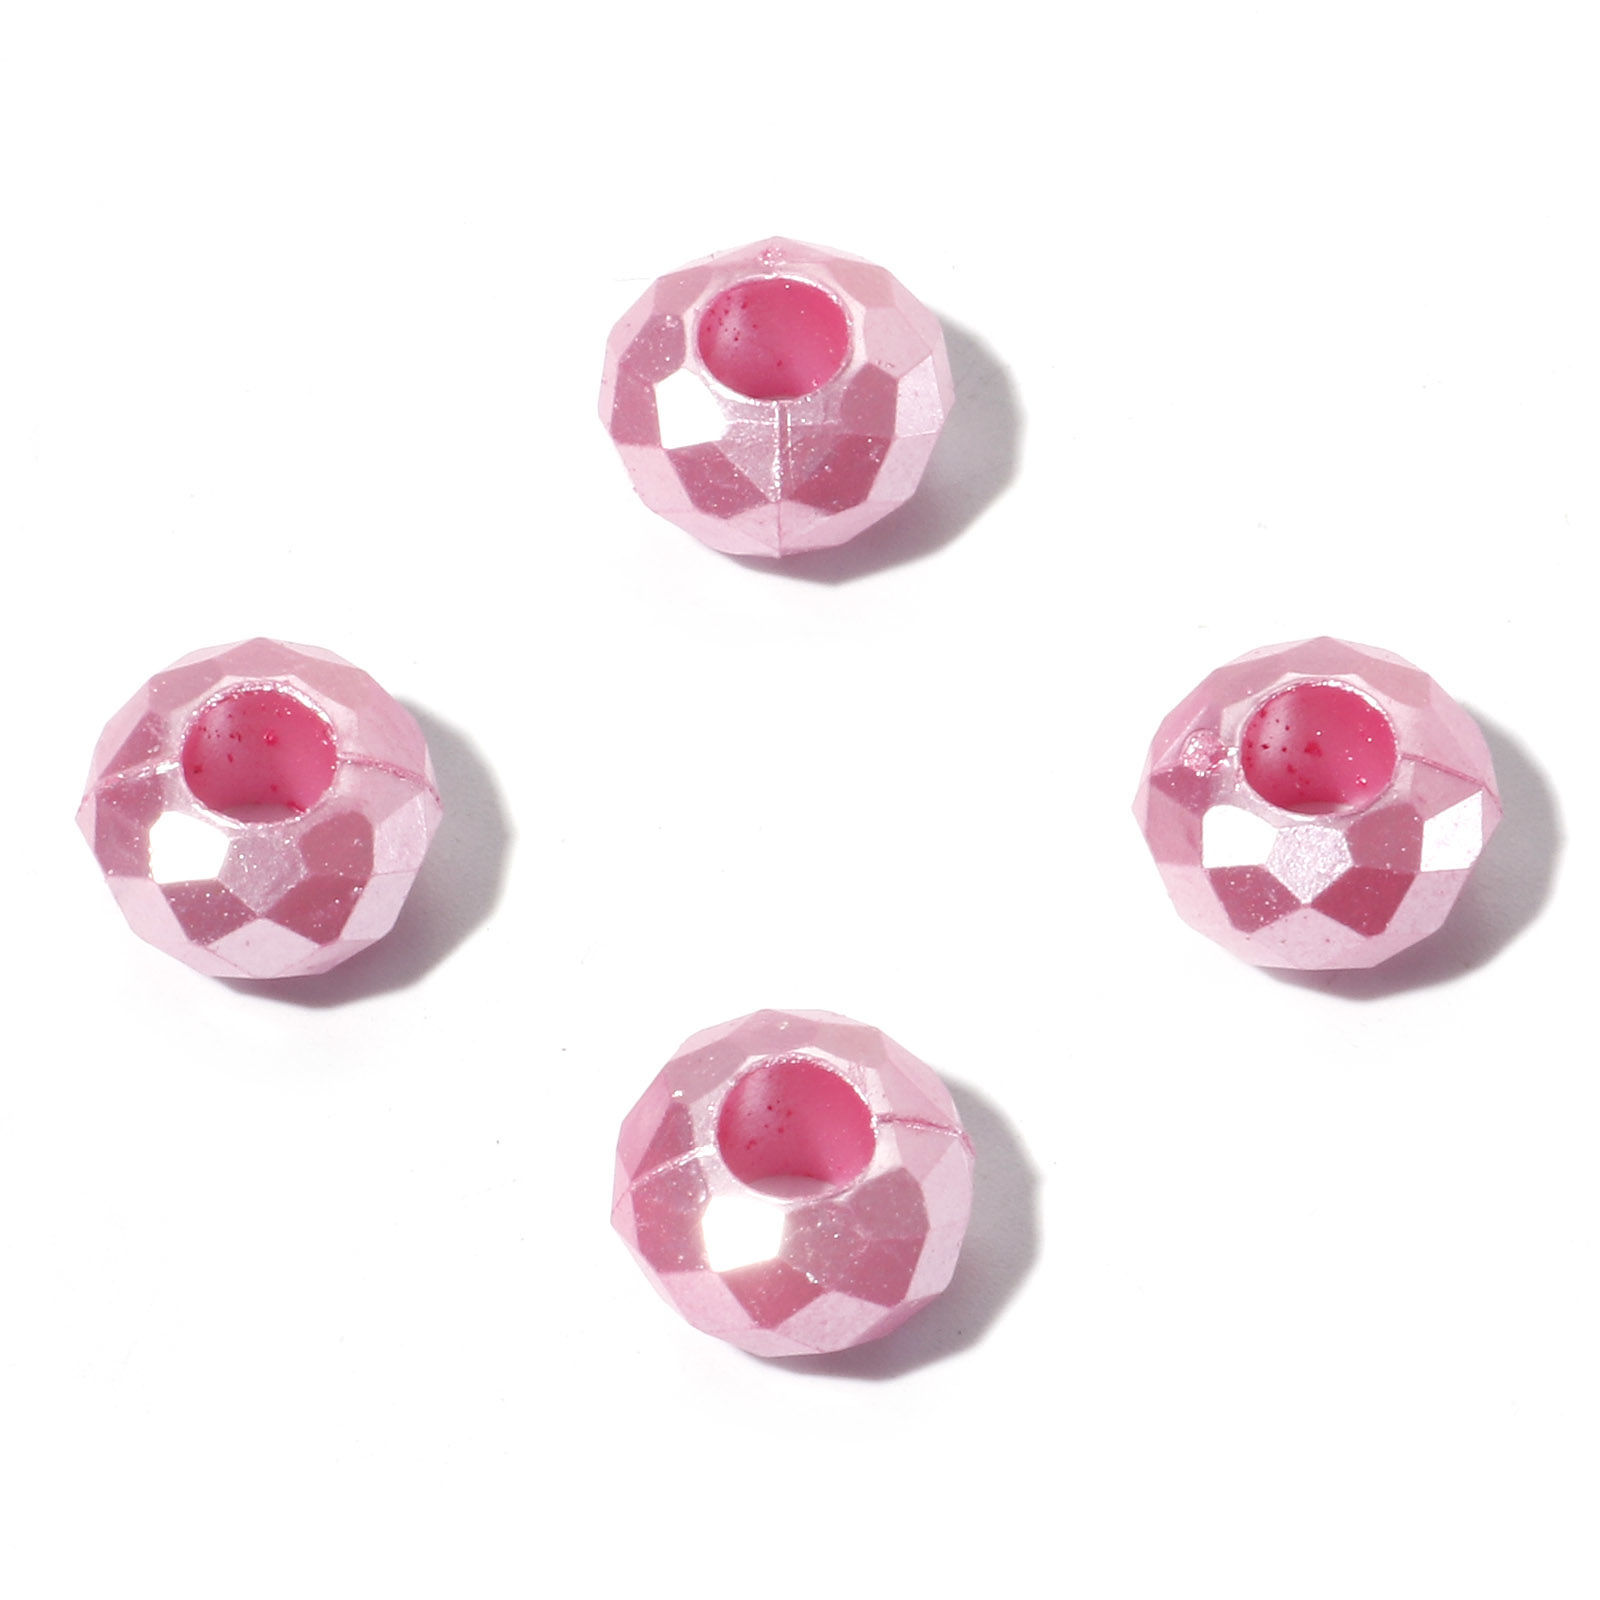 Picture of Acrylic European Style Large Hole Charm Beads Pink Round Faceted 12mm Dia., Hole: Approx 4.6mm, 100 PCs